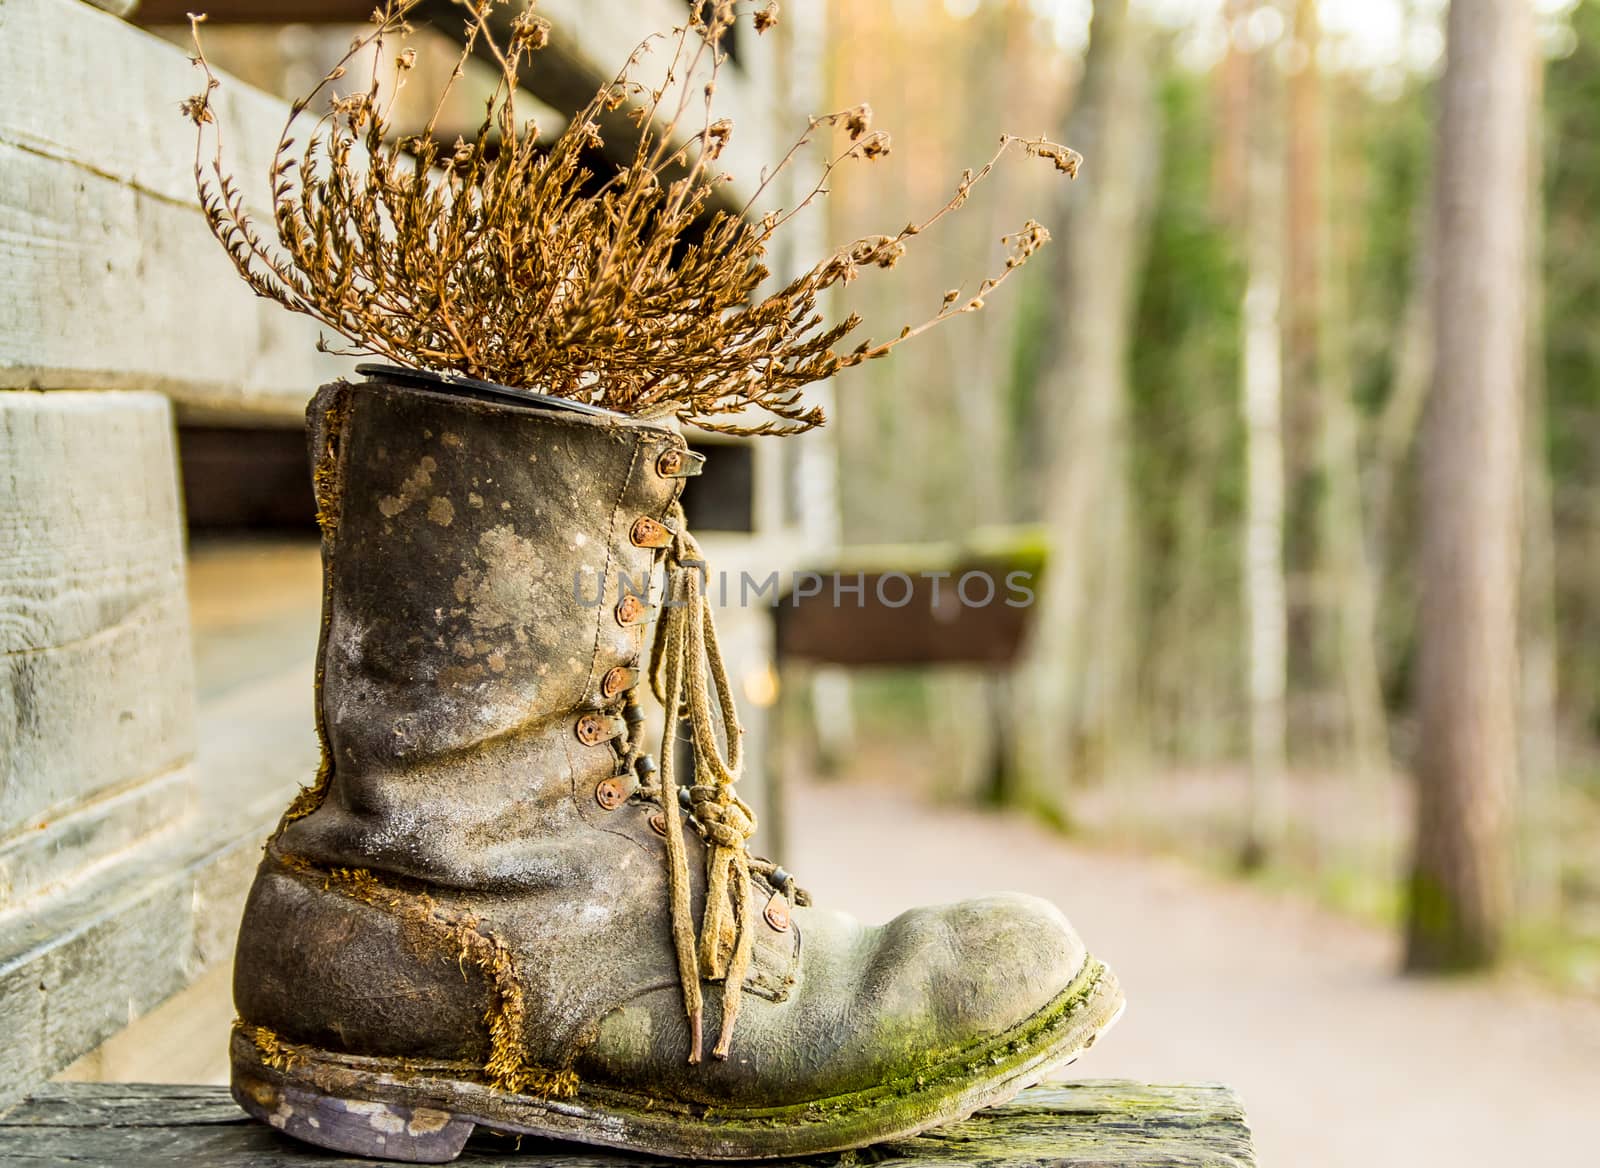 Old worn leather boot by Alexanderphoto